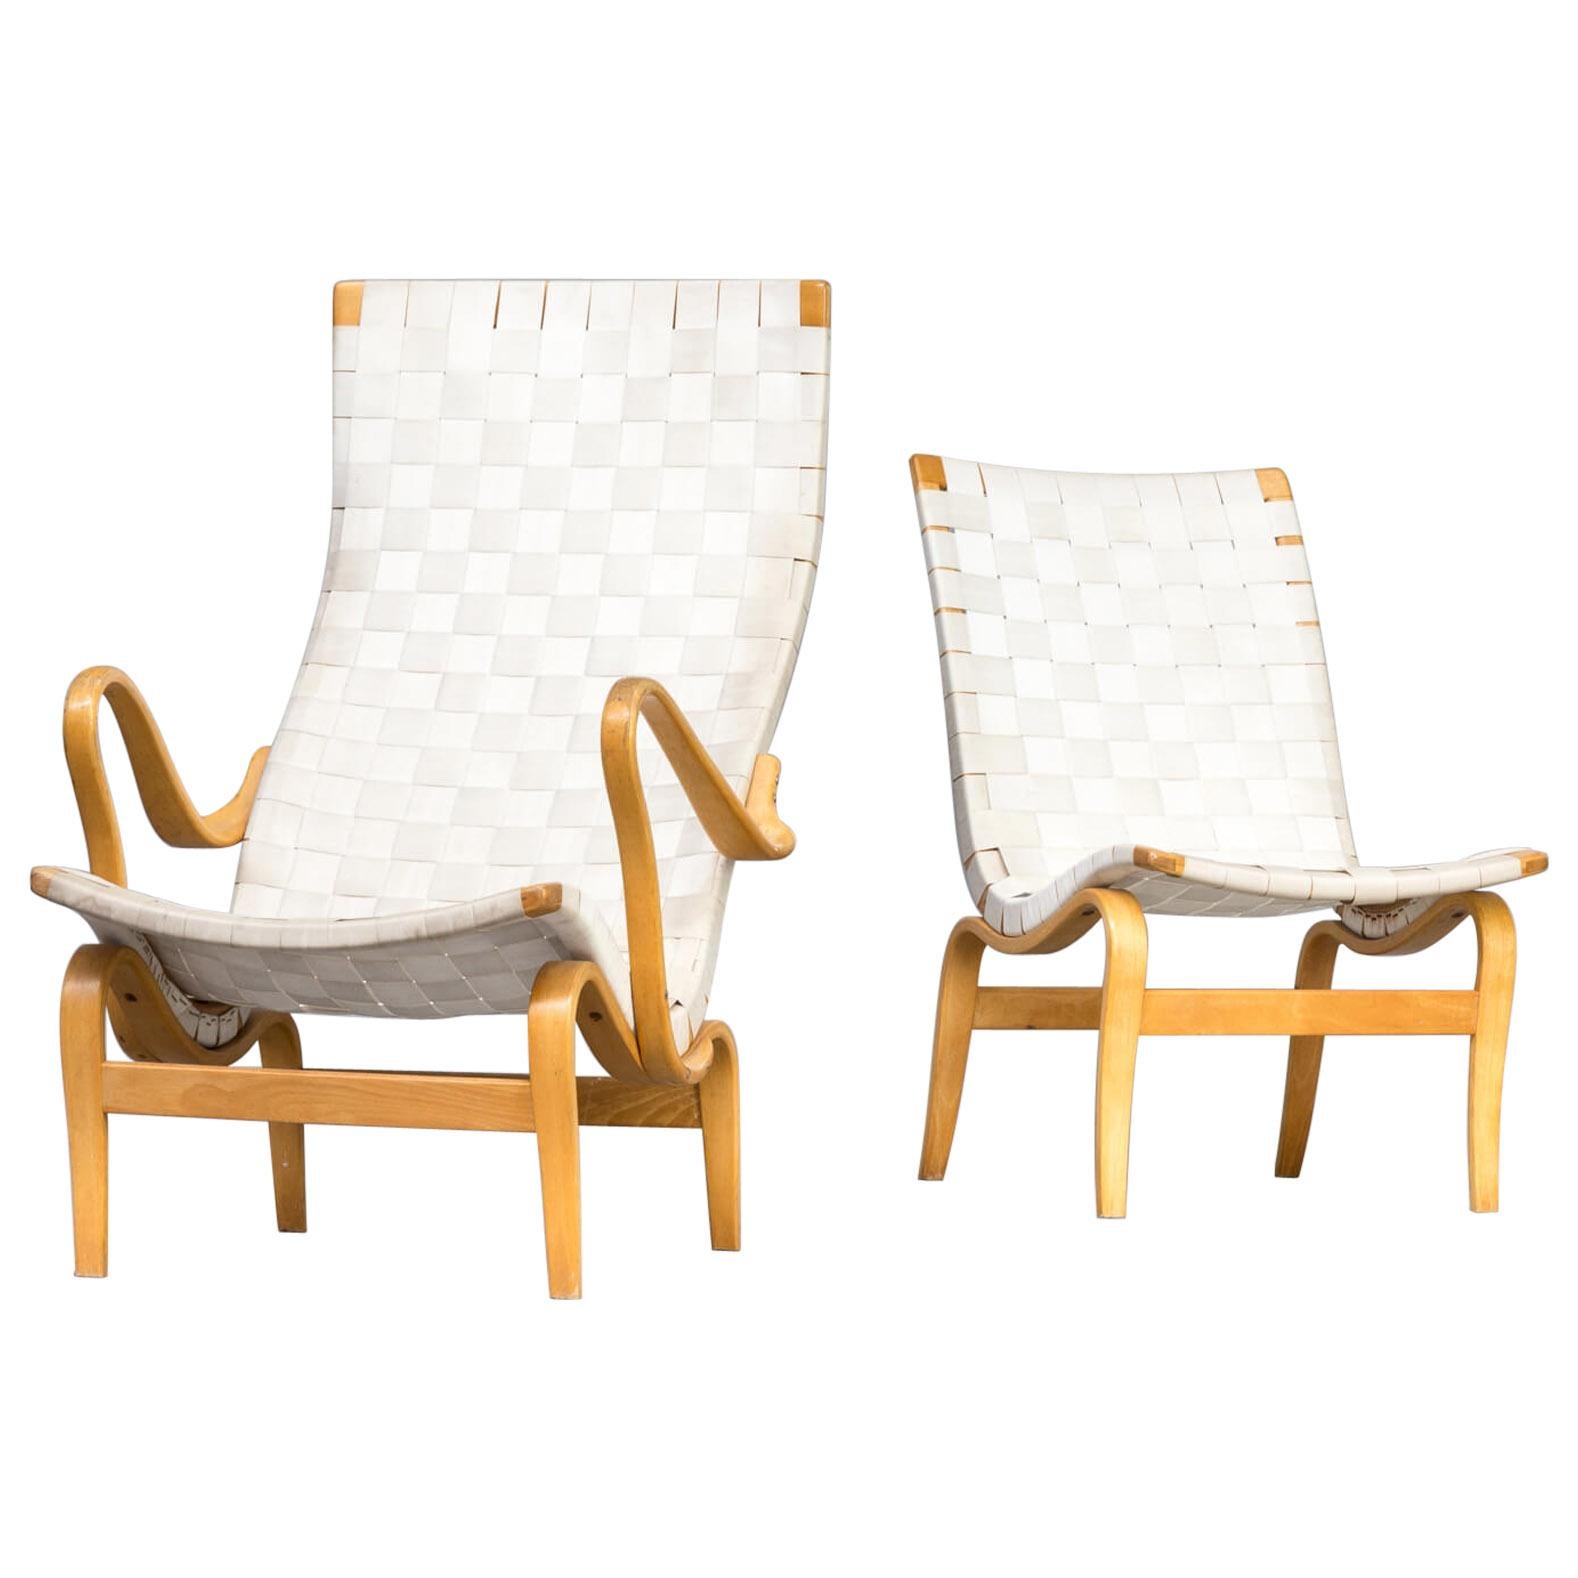 1970s Bruno Mathsson ‘Pernilla’ Chairs for Karl Mathsson Set of 2 For Sale